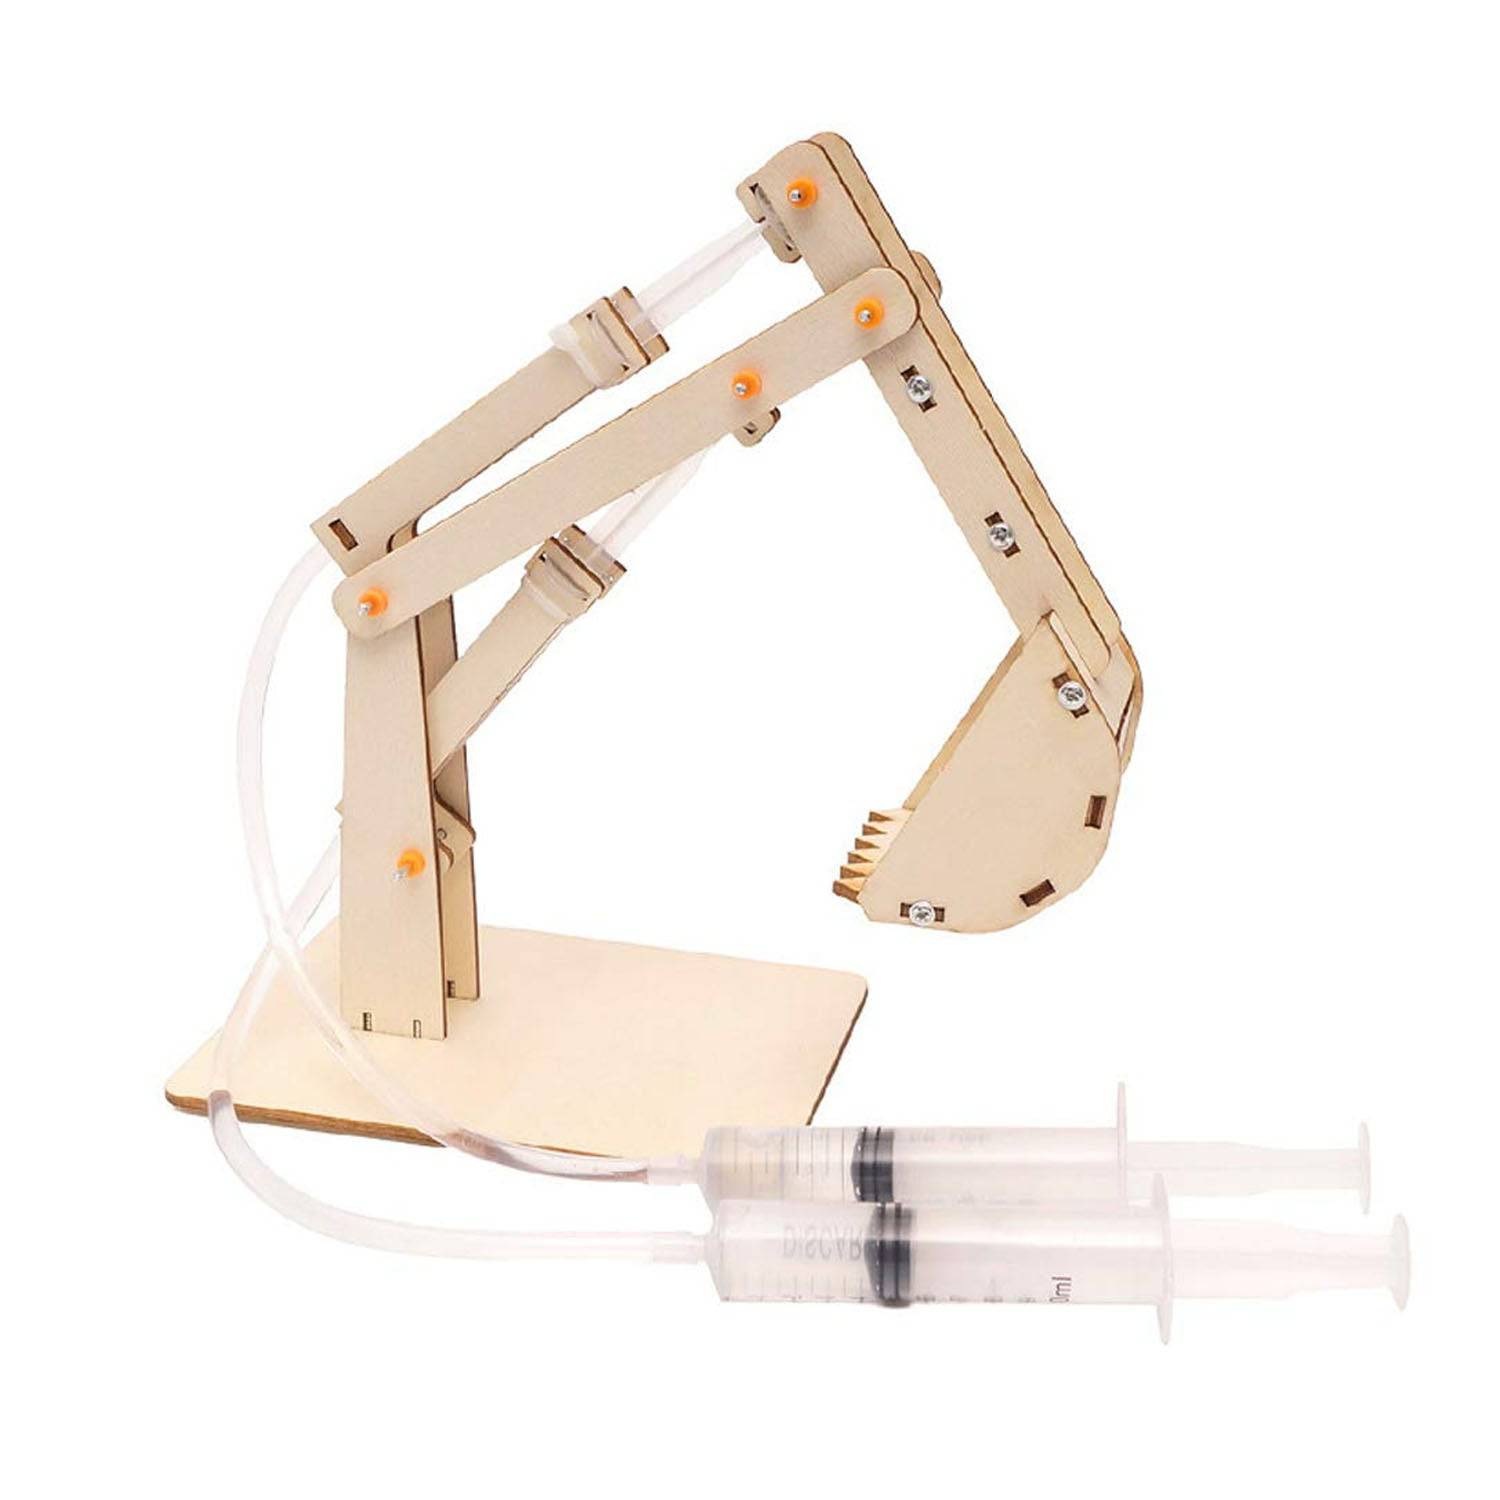 DIY Hydraulic Excavator STEM Kit Wooden Two Degree of Motion